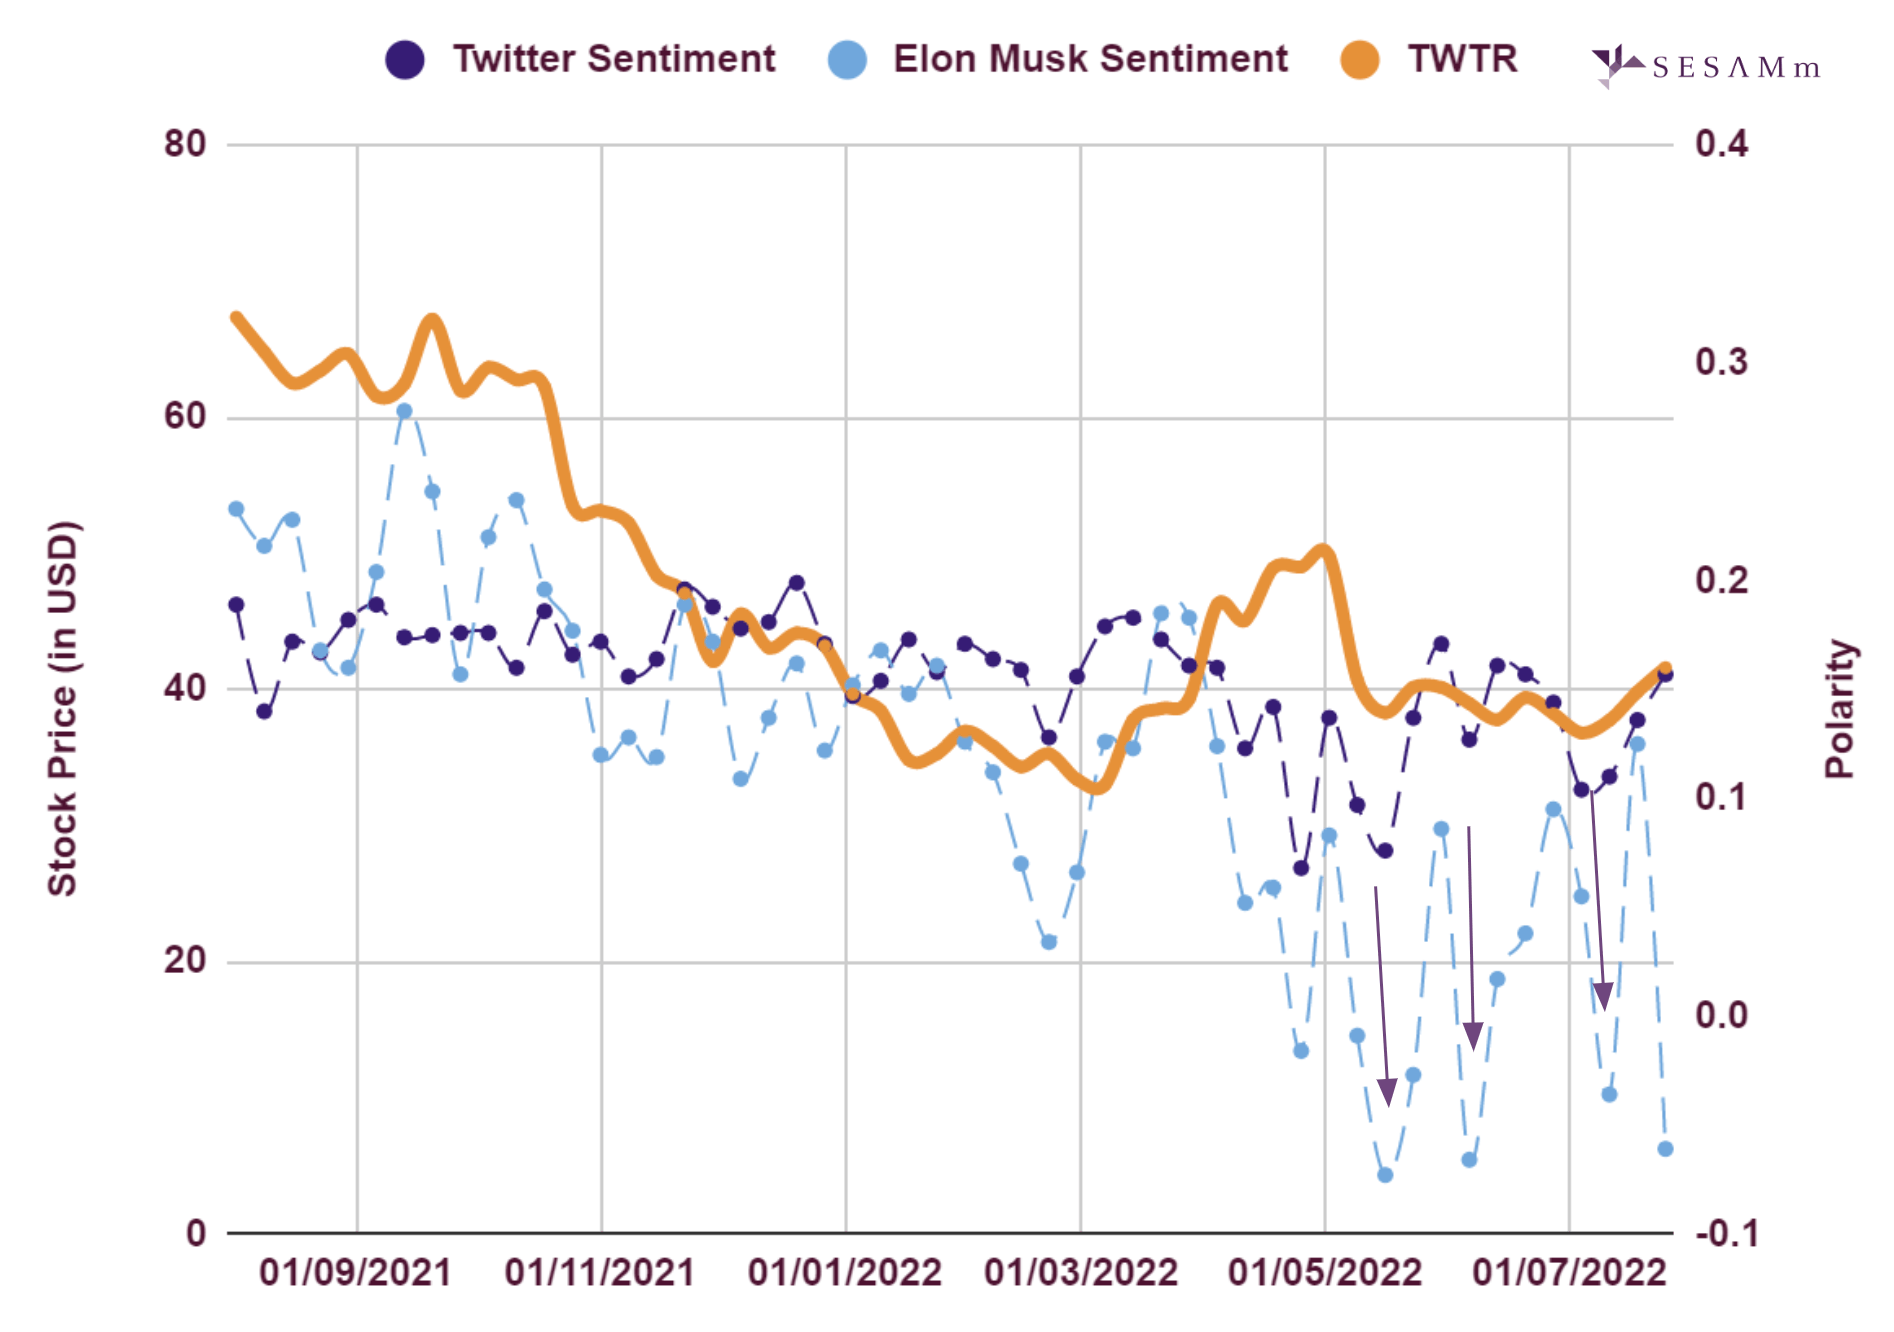 Twitter stock price and polarity chart for Twitter and Musk